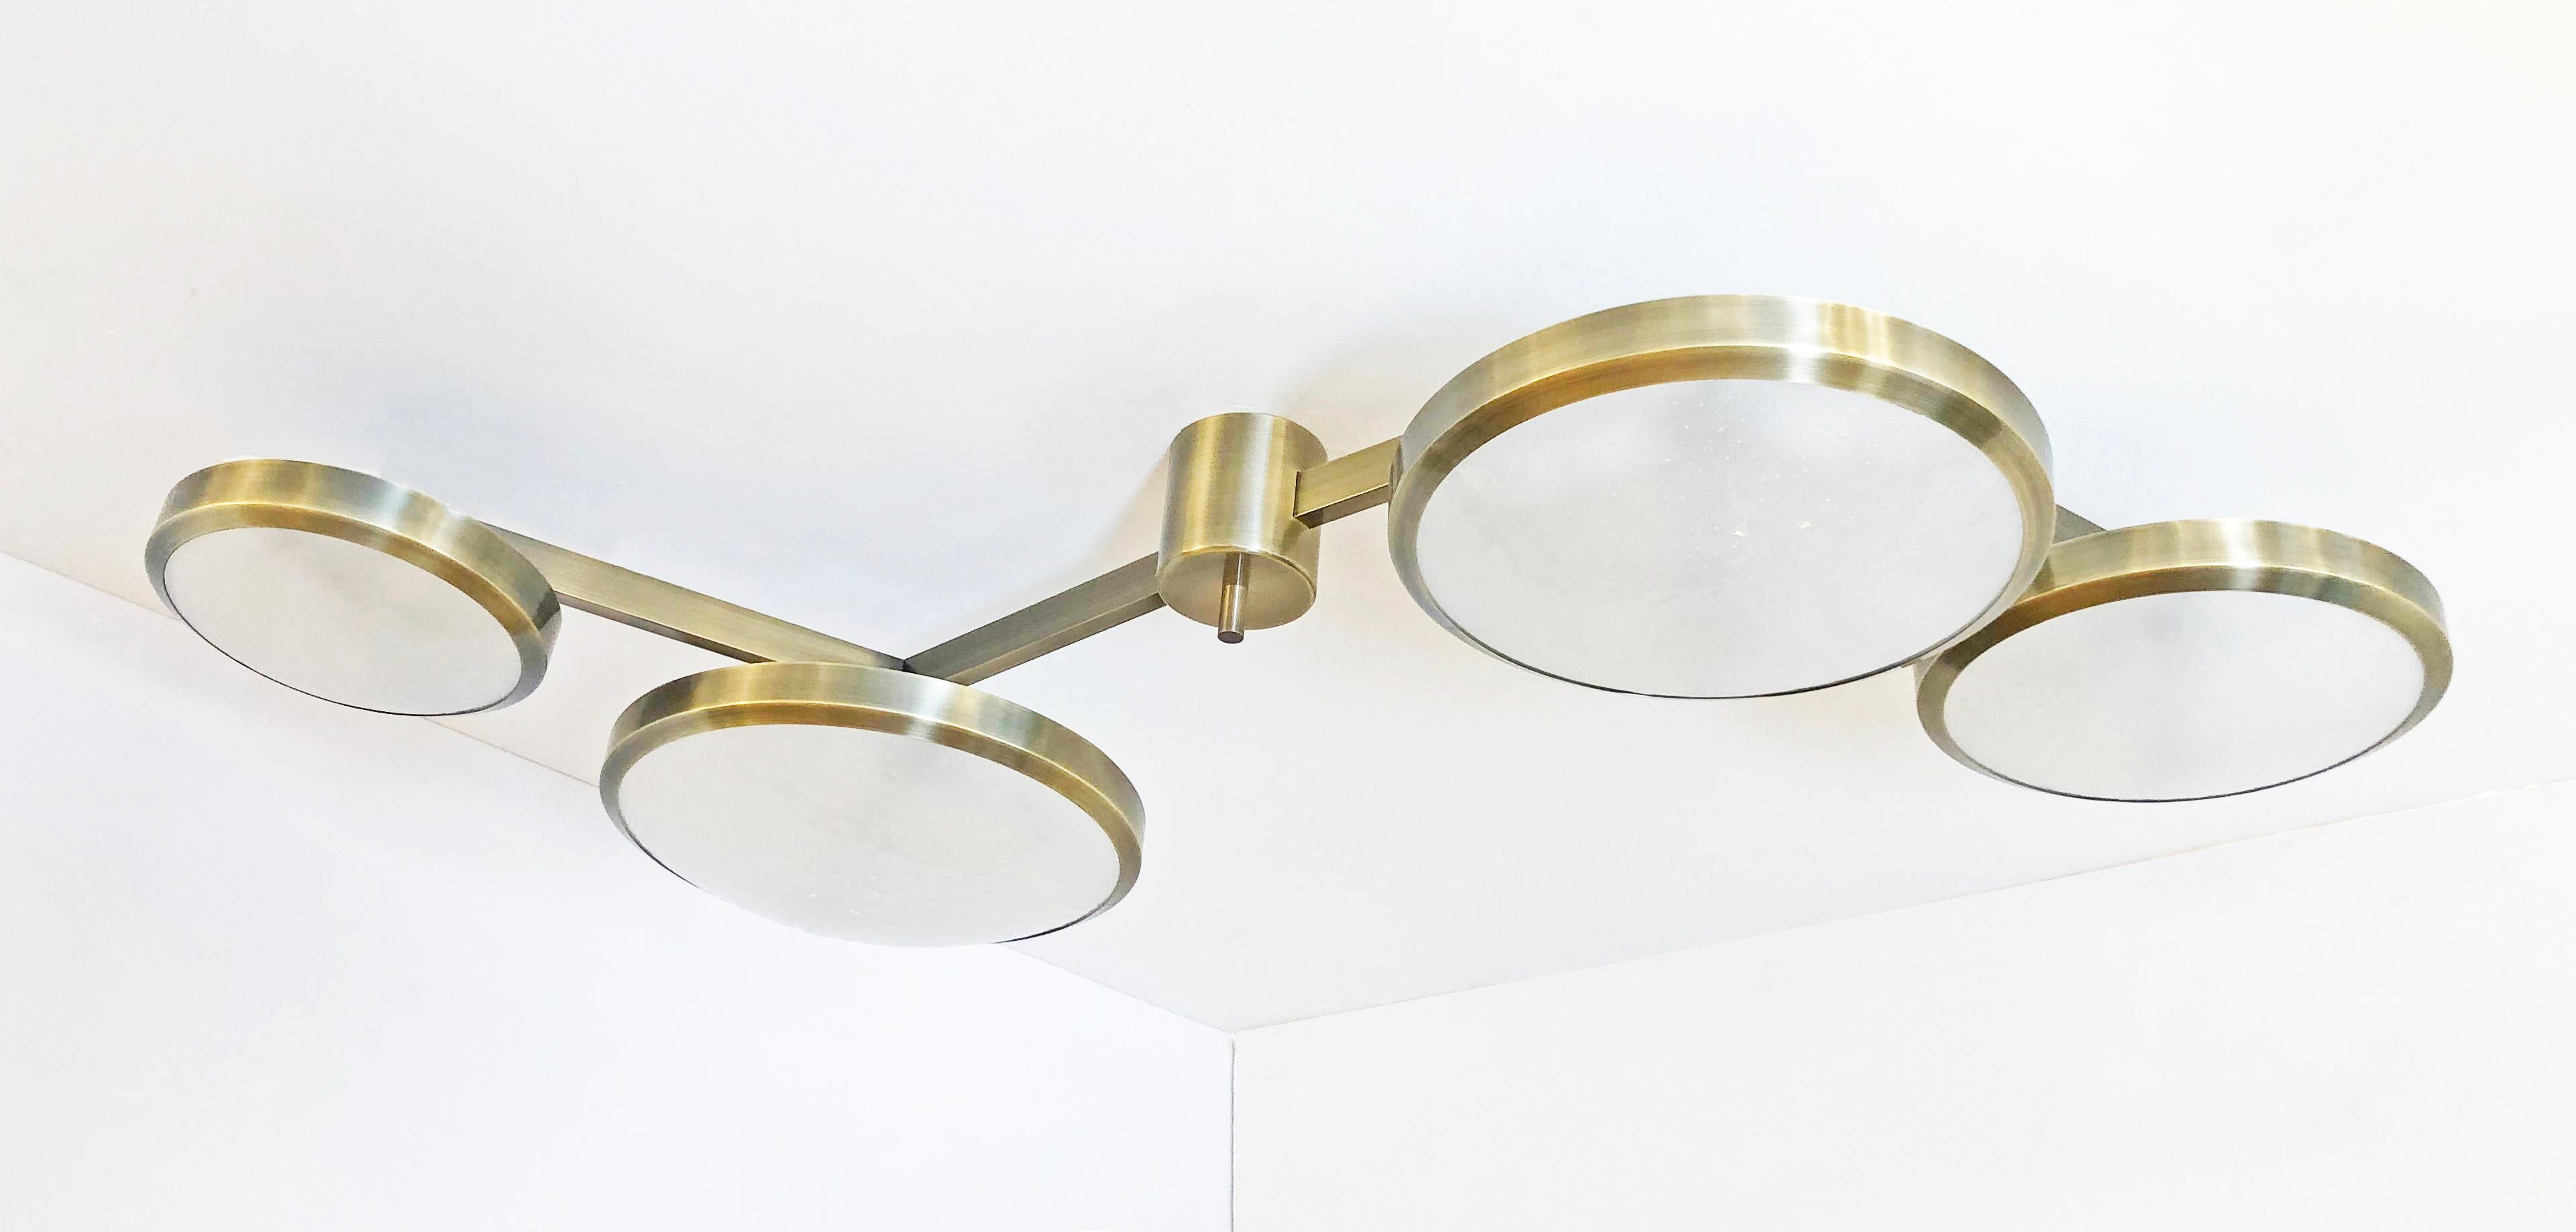 Brass Quattro Ceiling Light by Gaspare Asaro-Polished Nickel Finish For Sale